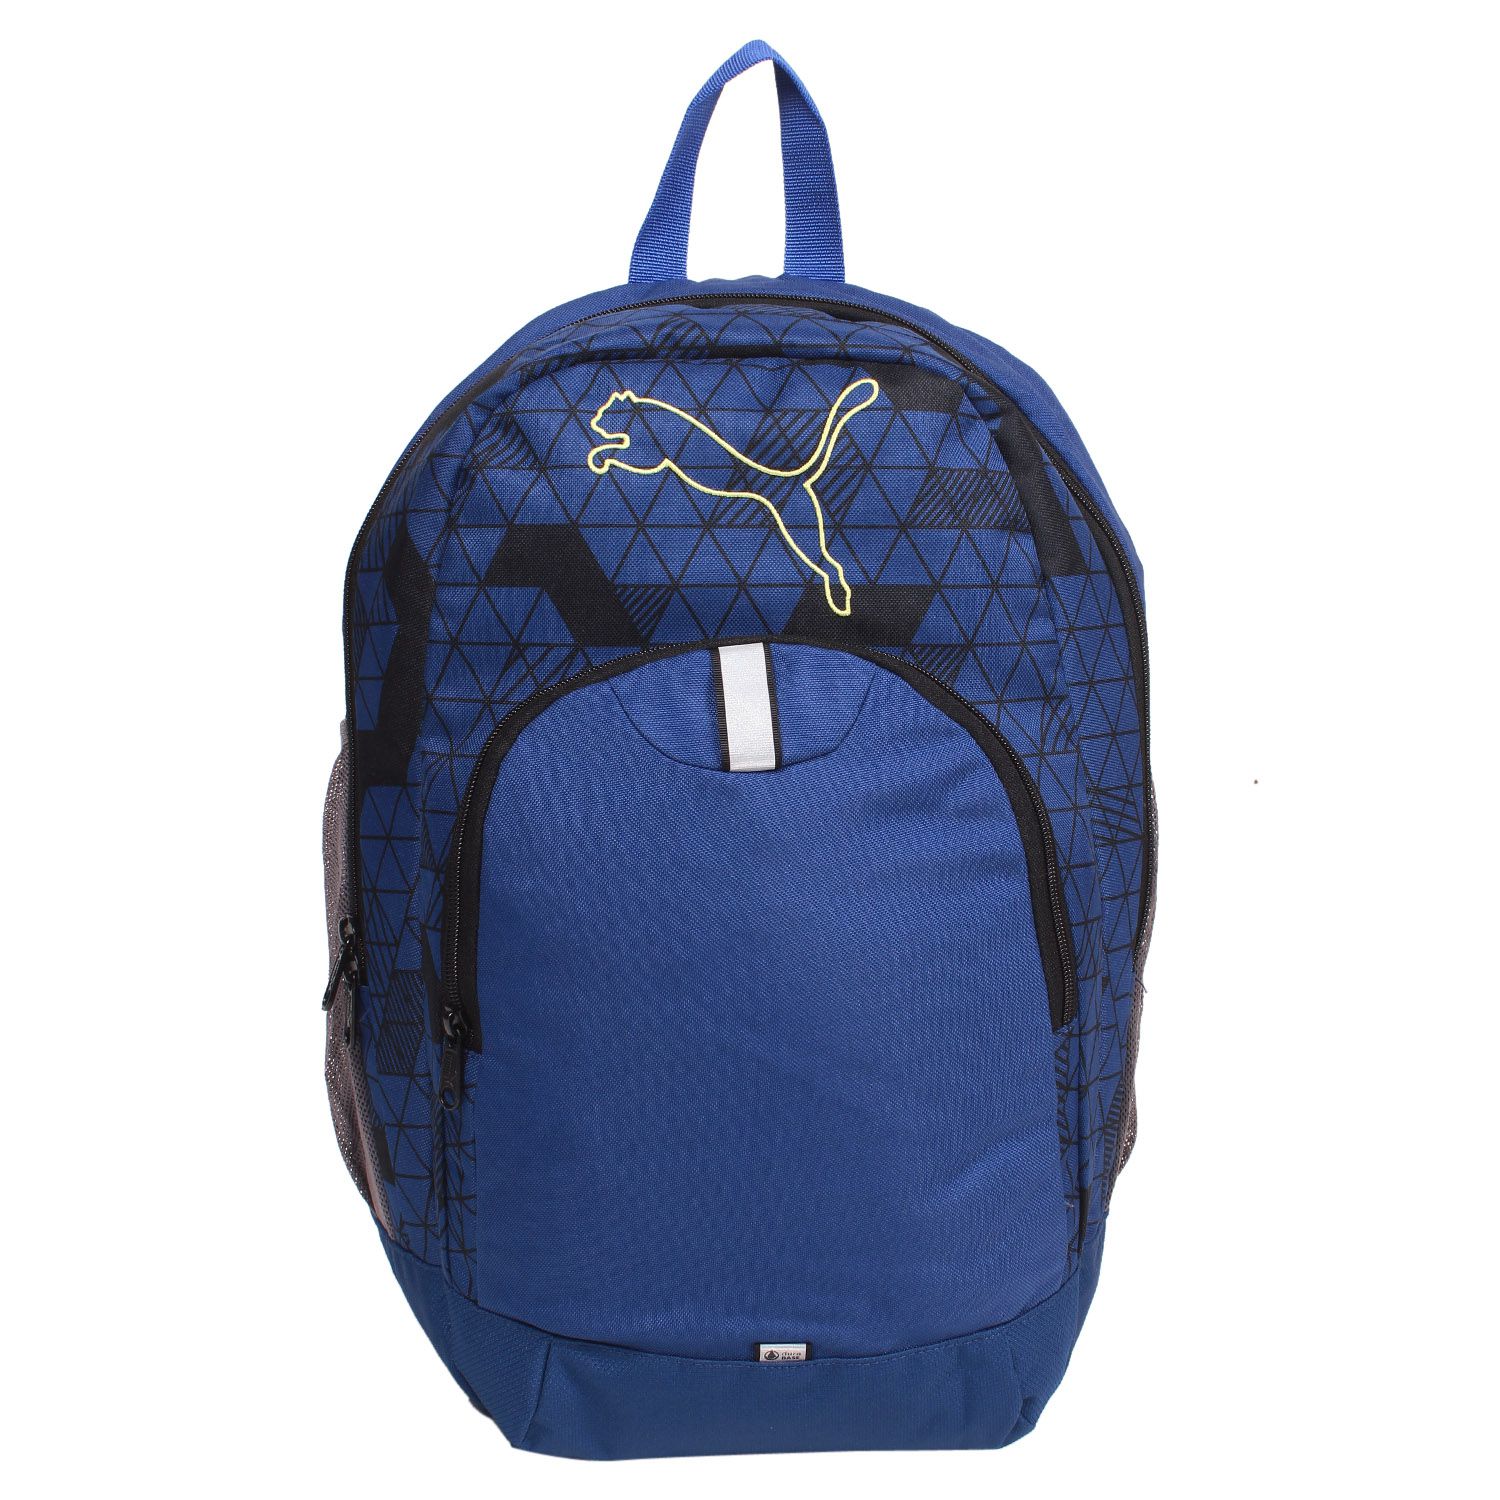 Puma Blue Backpack - Buy Puma Blue Backpack Online at Best Prices in India on Snapdeal